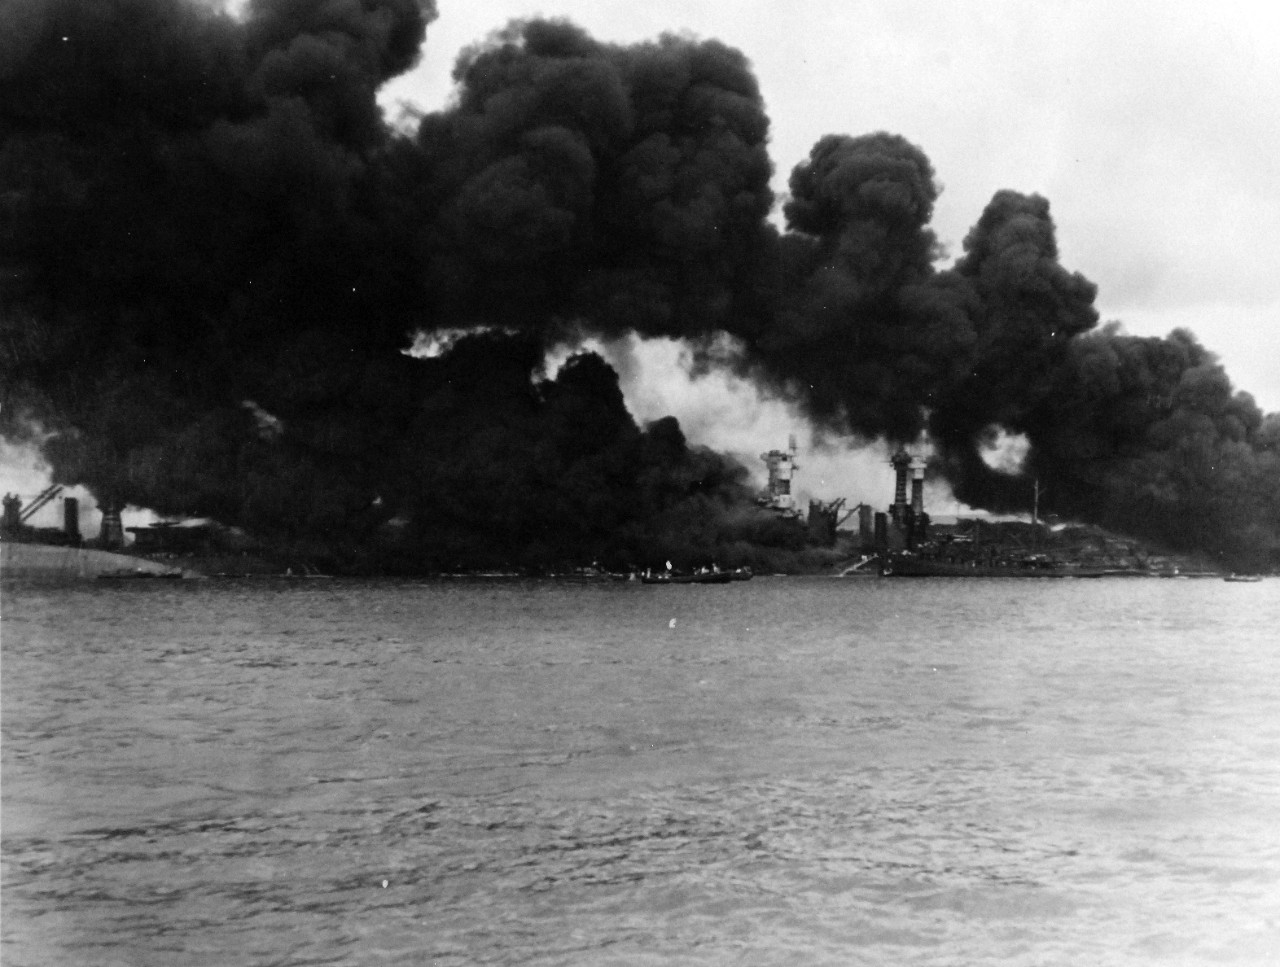 80-G-32416:  Japanese Attack on Pearl Harbor, December 7, 1941.  View of “Battleship Row” during or immediately after the Japanese raid.  USS West Virginia (BB 48) and USS Tennessee (BB 43) are in the center right.   The capsized USS Oklahoma (BB 37) is at the left, alongside USS Maryland (BB 46). Official U.S. Navy photograph, now in the collections of the National Archives.    (9/15/15).